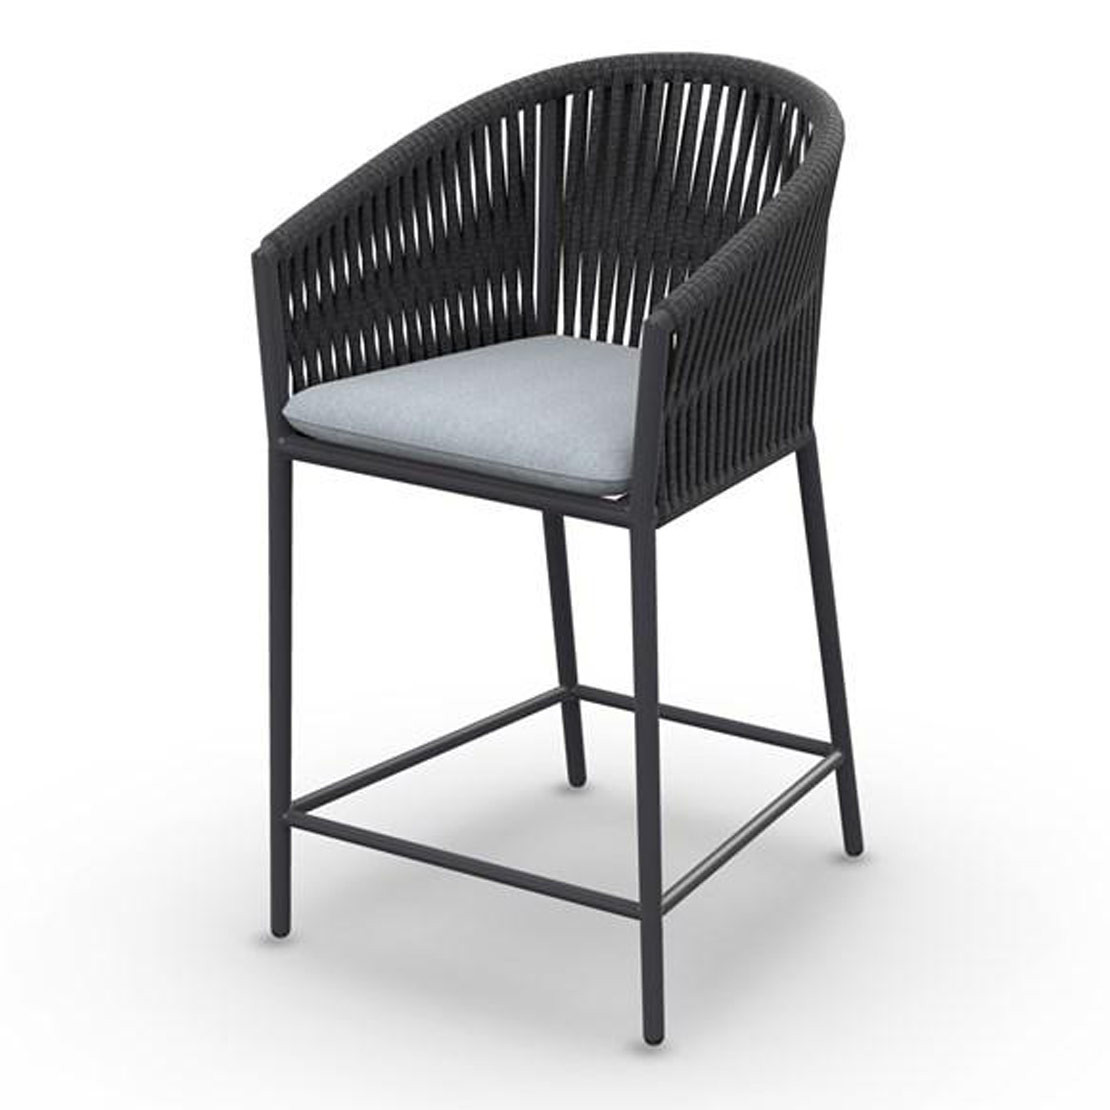 Fortuna Rope Bar Chair With Arms Alu Charcoal Mat Rope Straight